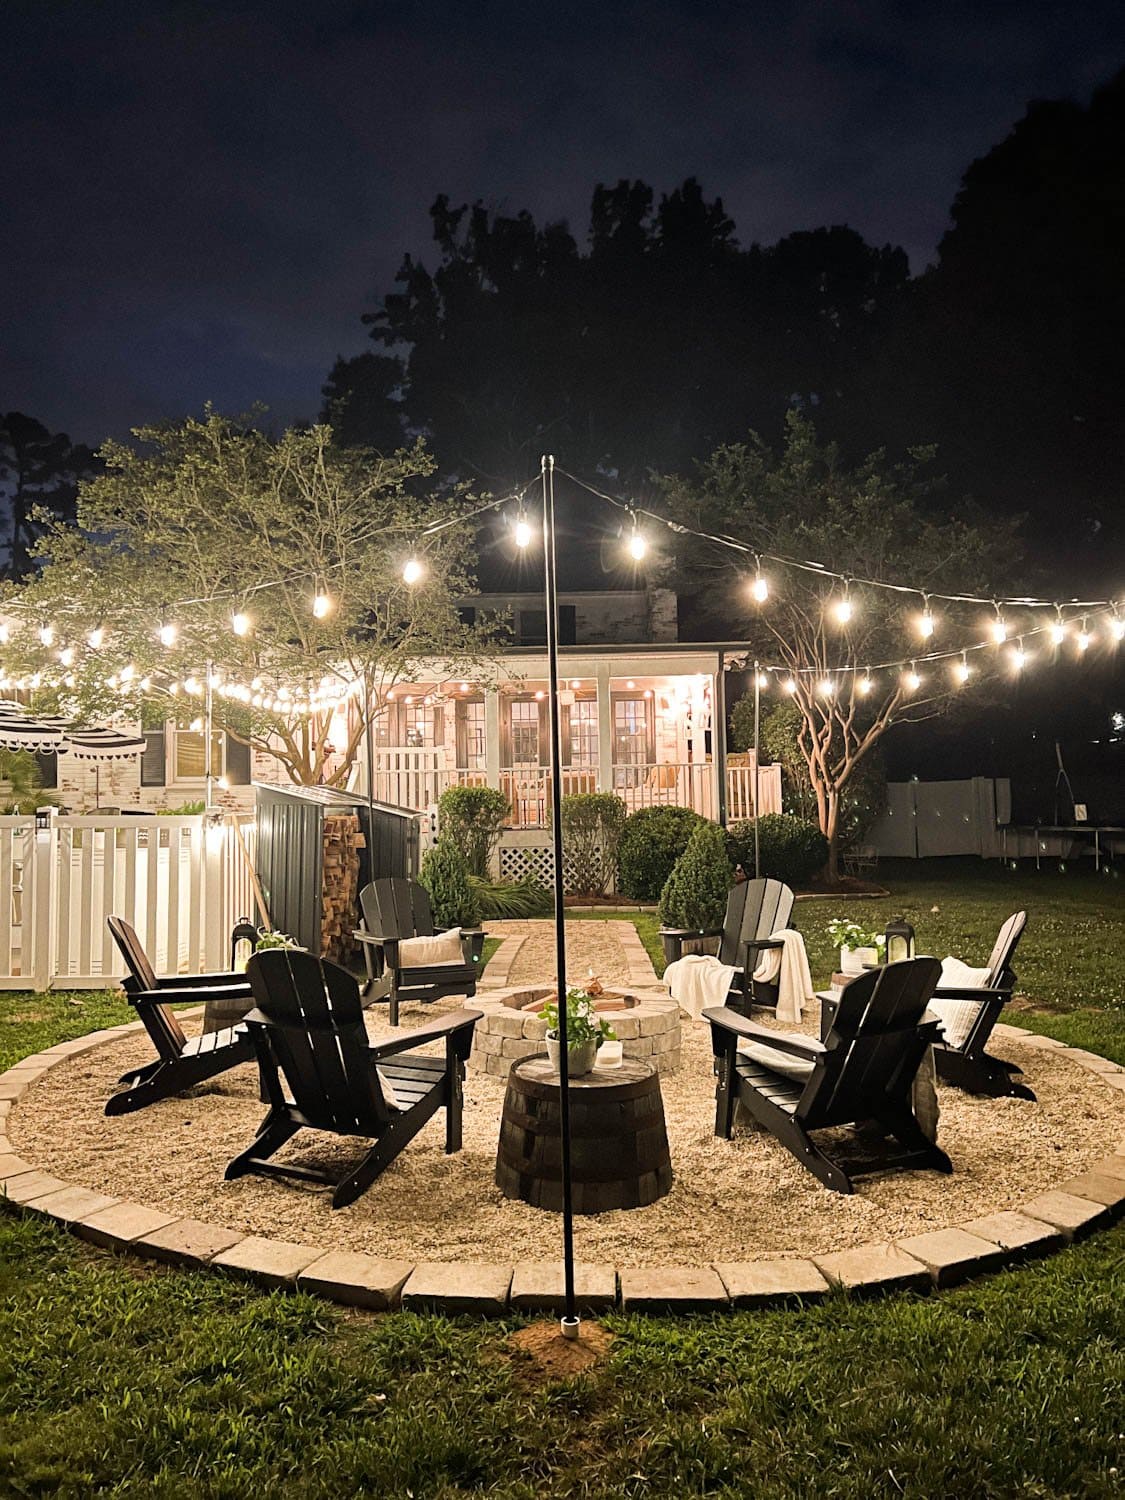 Outdoor Fire Pit with String Lights: Cozy Ambiance for Your Yard插图2